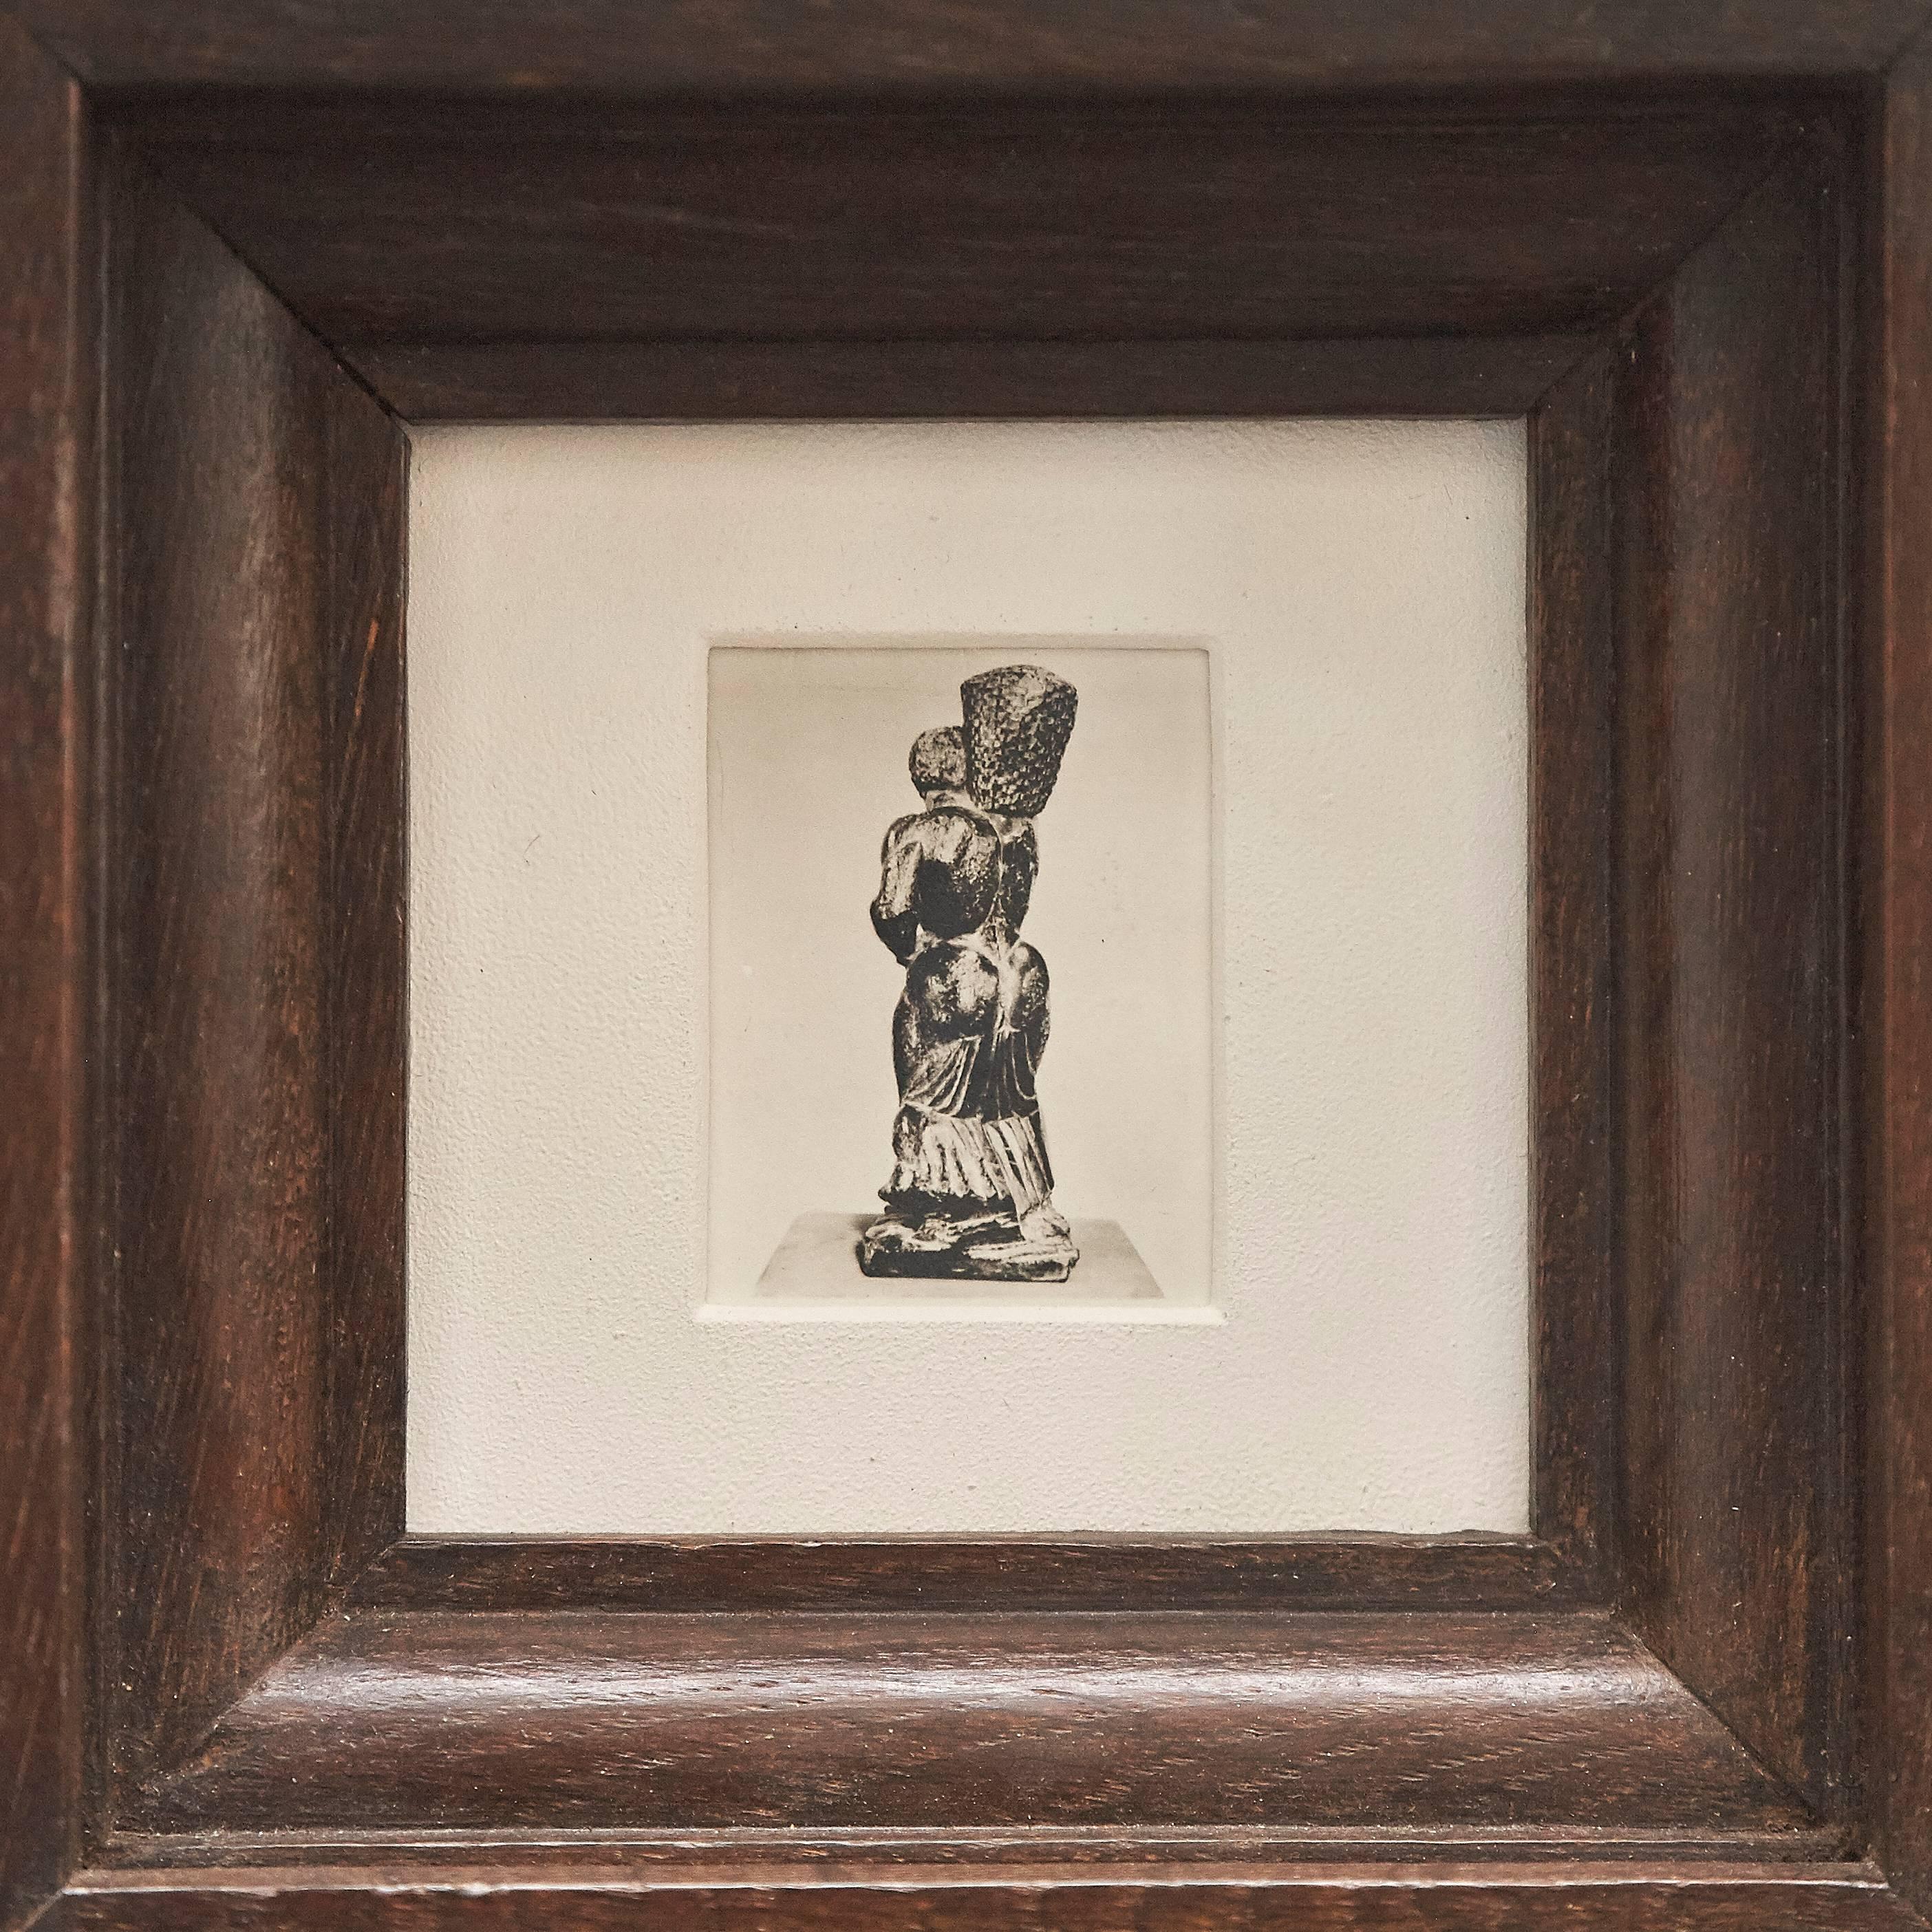 Manolo Hugué archive photography of sculpture.
Printed, circa 1960.
Framed on a 19th century frame with museum glass.

Gelatin silver bromide print.

Experience the artistry of Spanish sculptor Manolo Hugué through this stunning archive photograph,